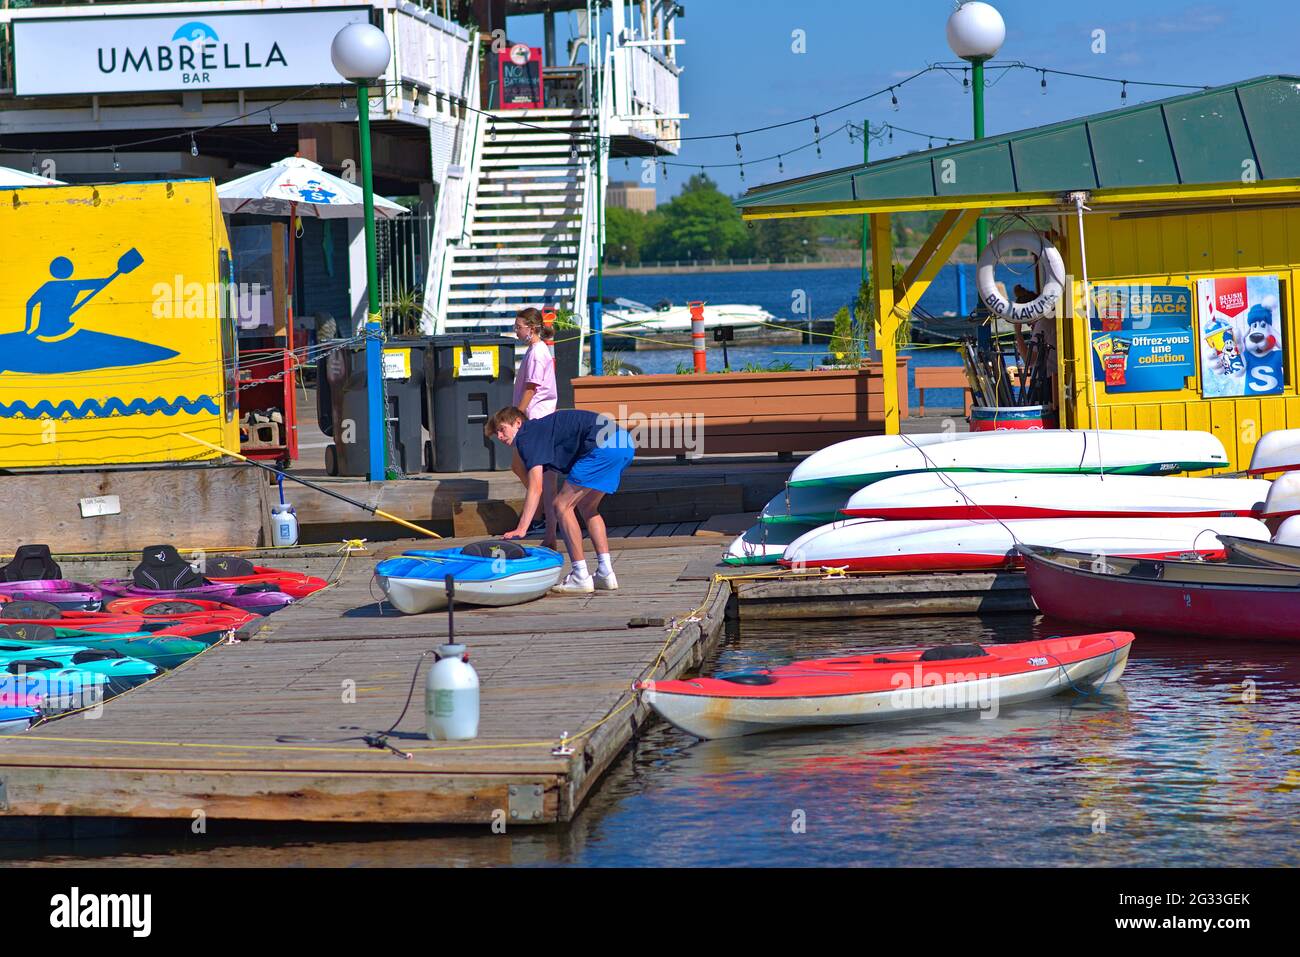 Boat rental in the time of COVID. Disinfectant and masks as staff prepare the kayaks for a sunny day on Dow's Lake, Ottawa, Canada. Stock Photo